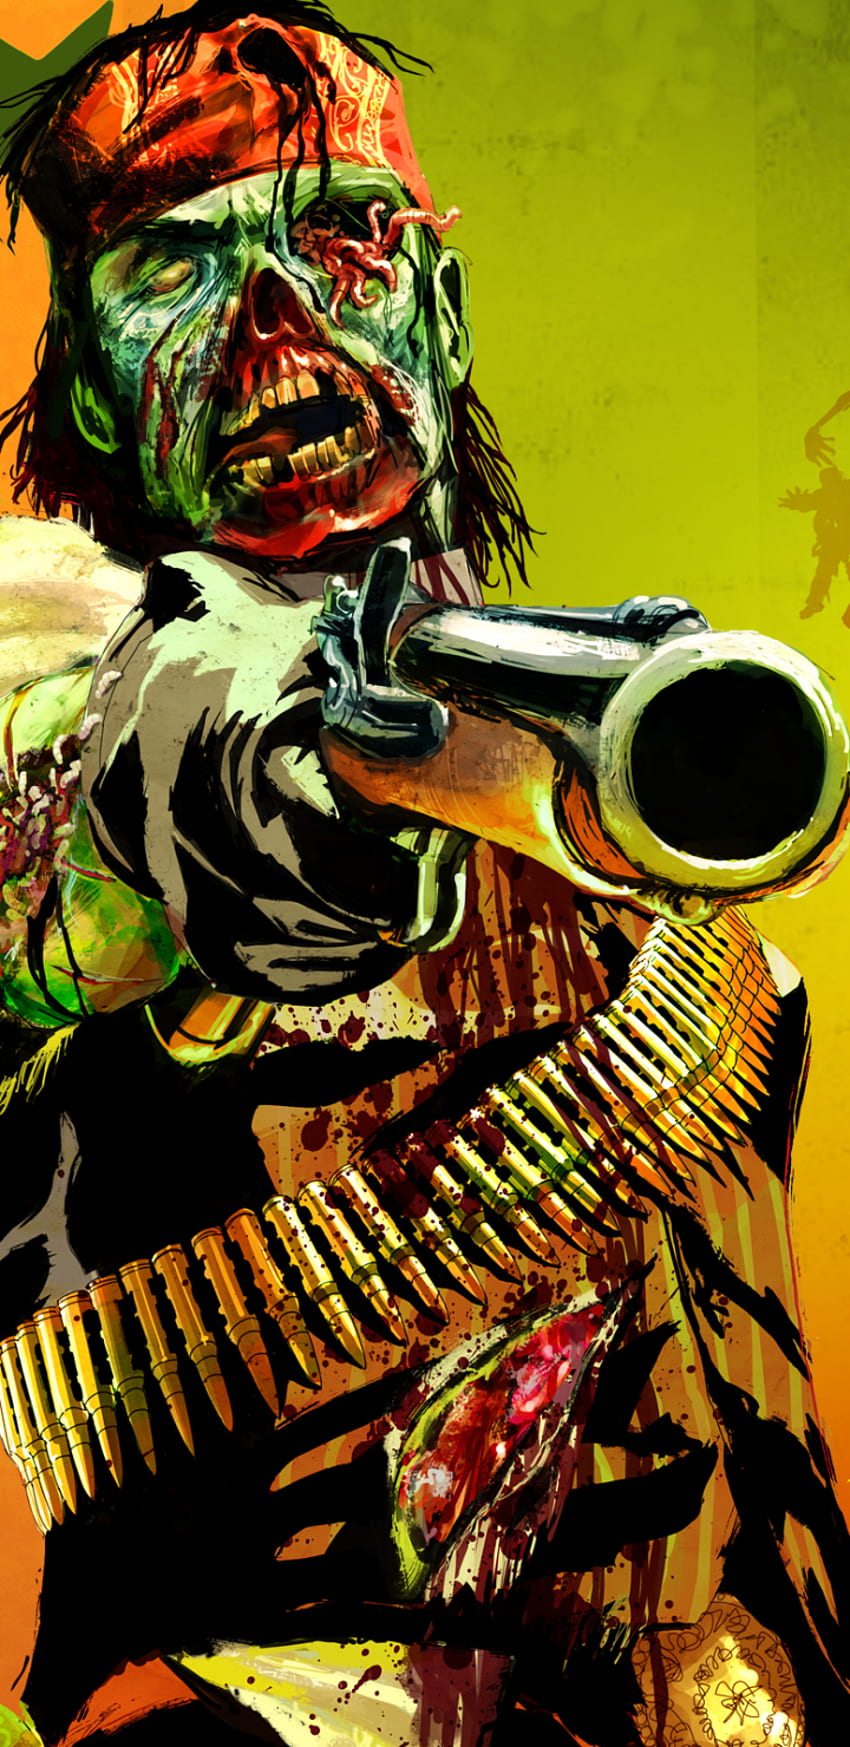 Video Game Red Dead Redemption () - Mobile Abyss, Undead Nightmare HD phone wallpaper